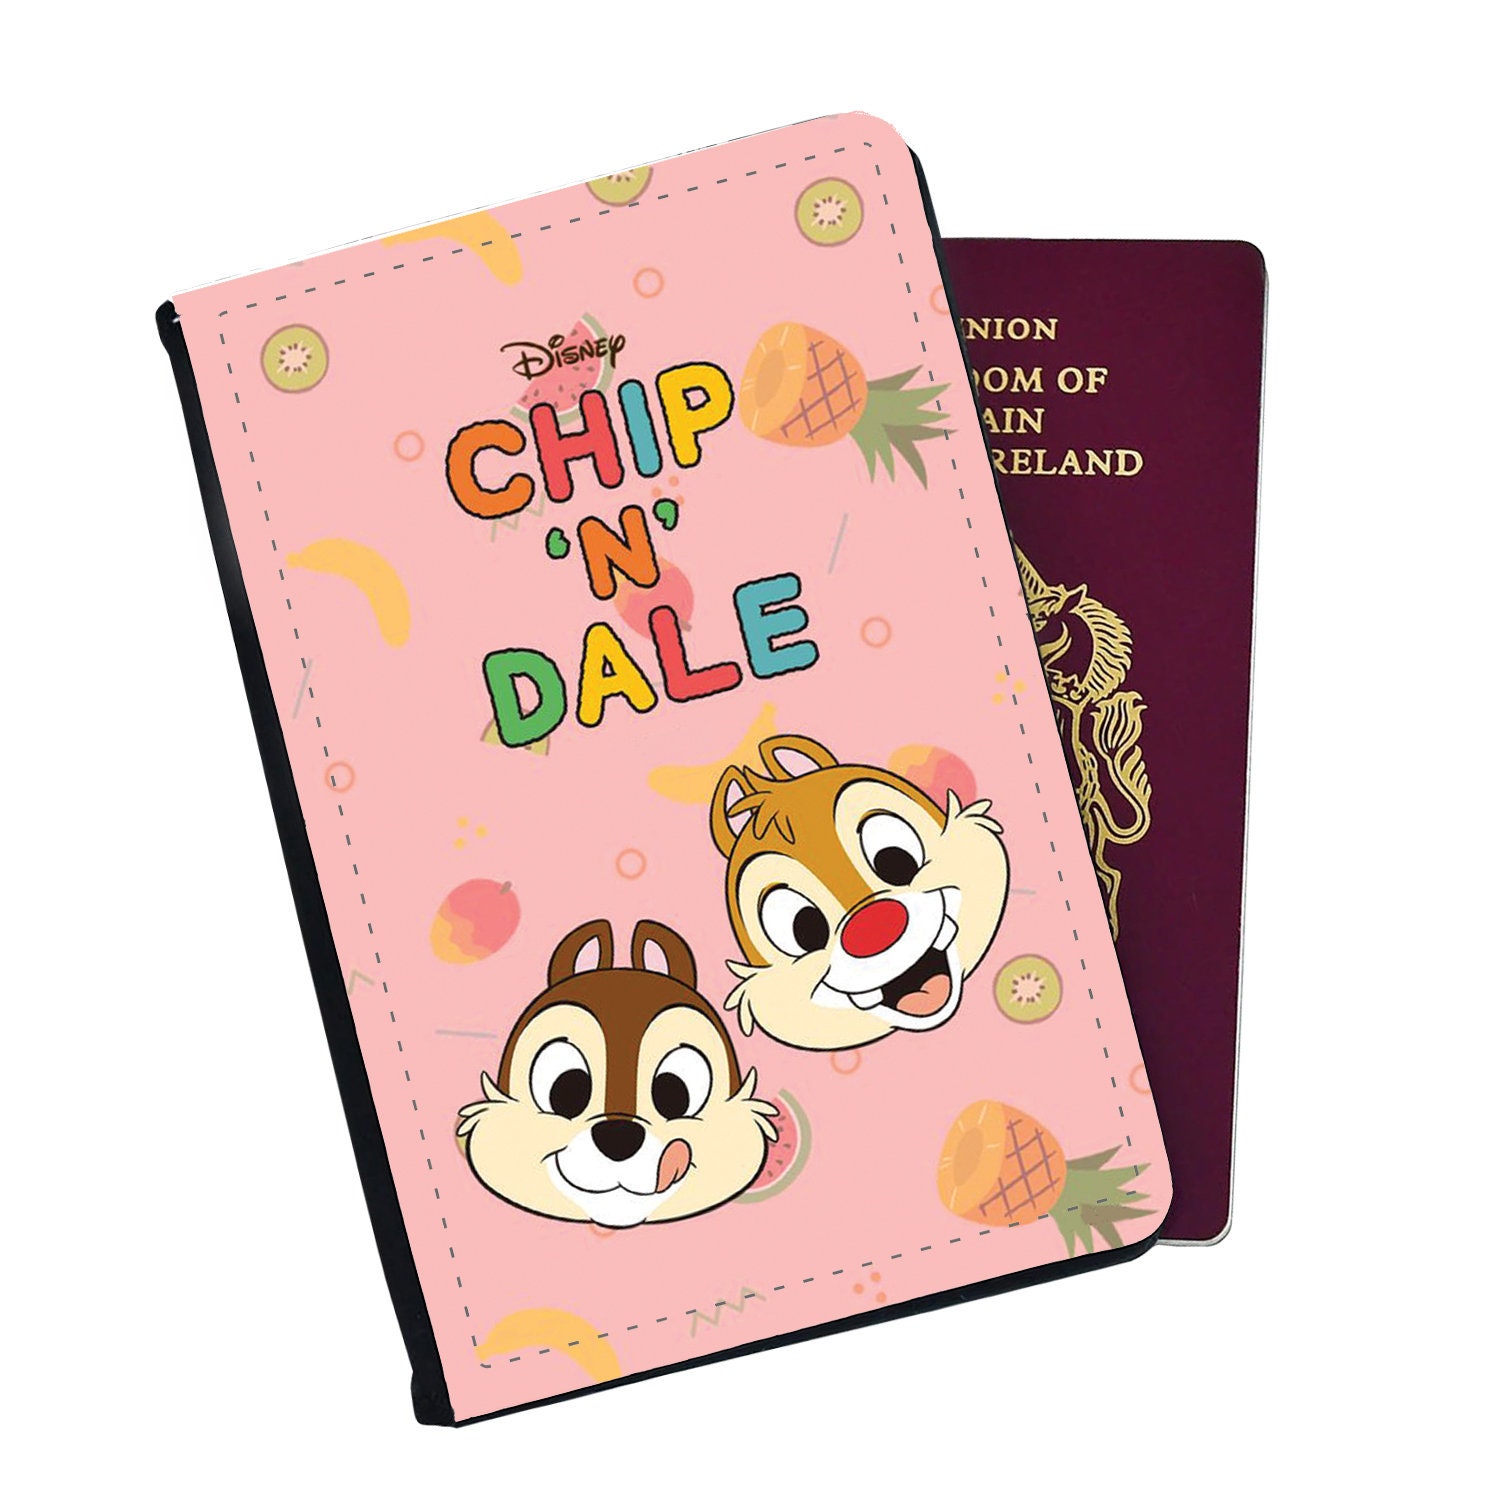 Discover Disney Chip and Dale Passport Cover